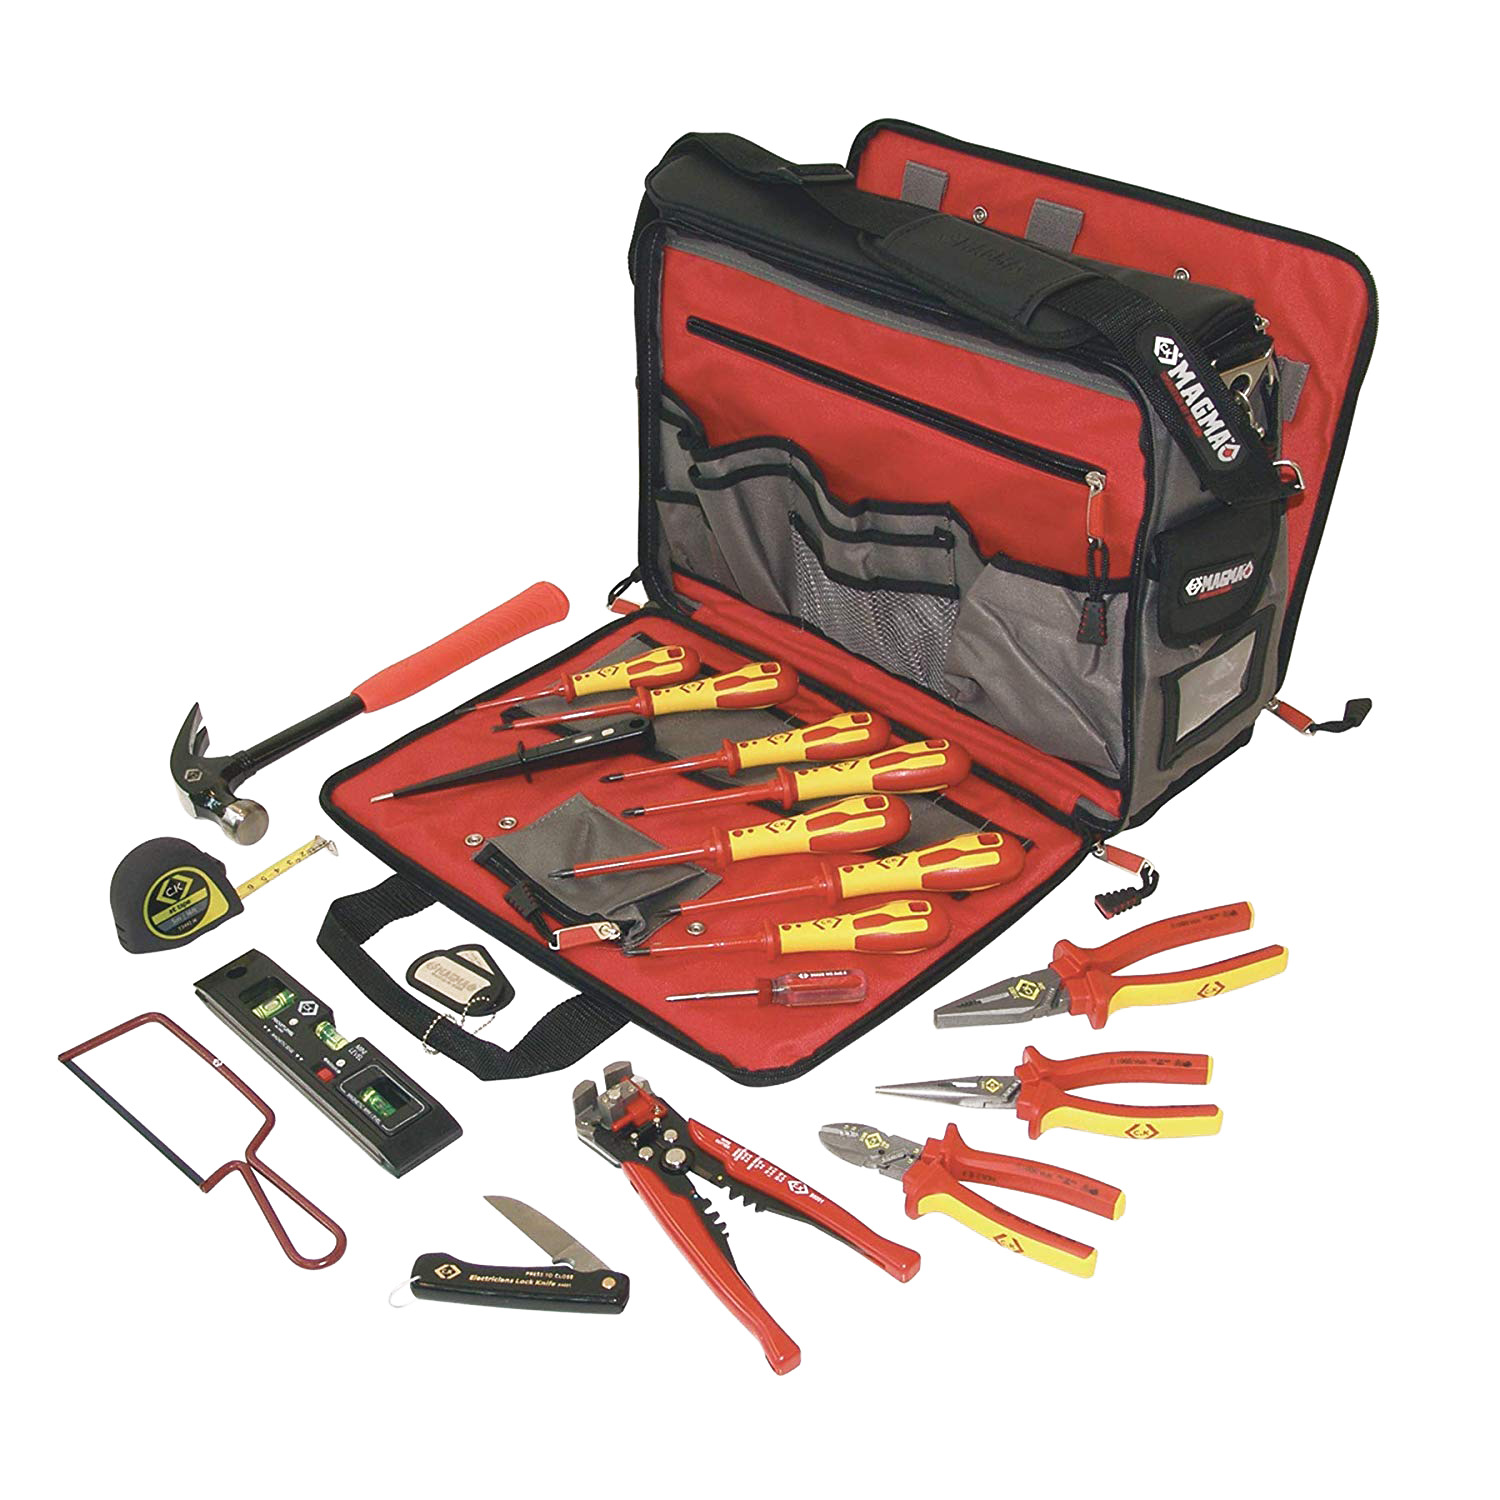 C.K Electrician's Premium 19 Piece Tool Kit with Tool Case 